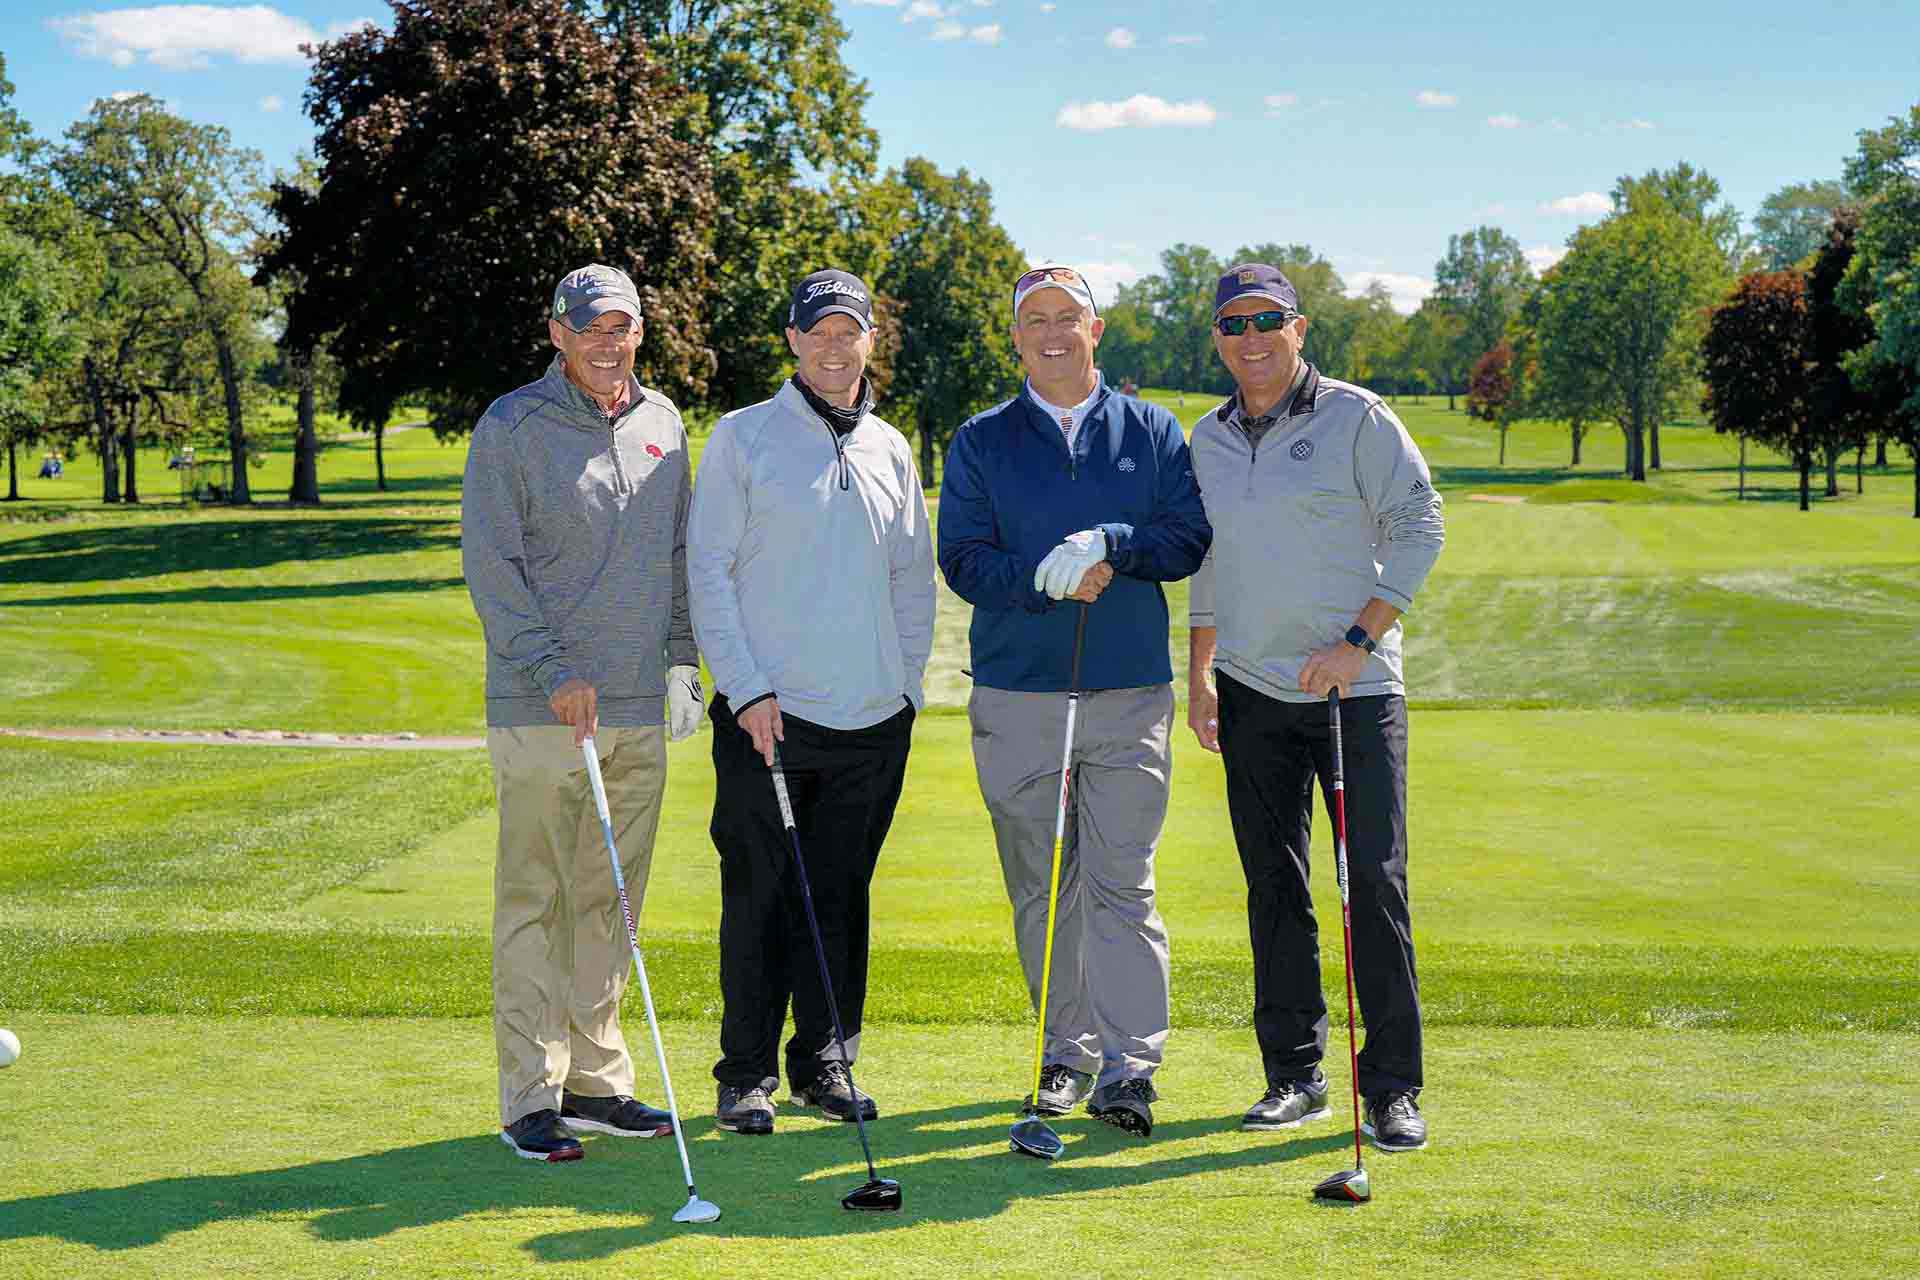 2020-endownment-classic-four-people-smiling-on-golf-course-at-event